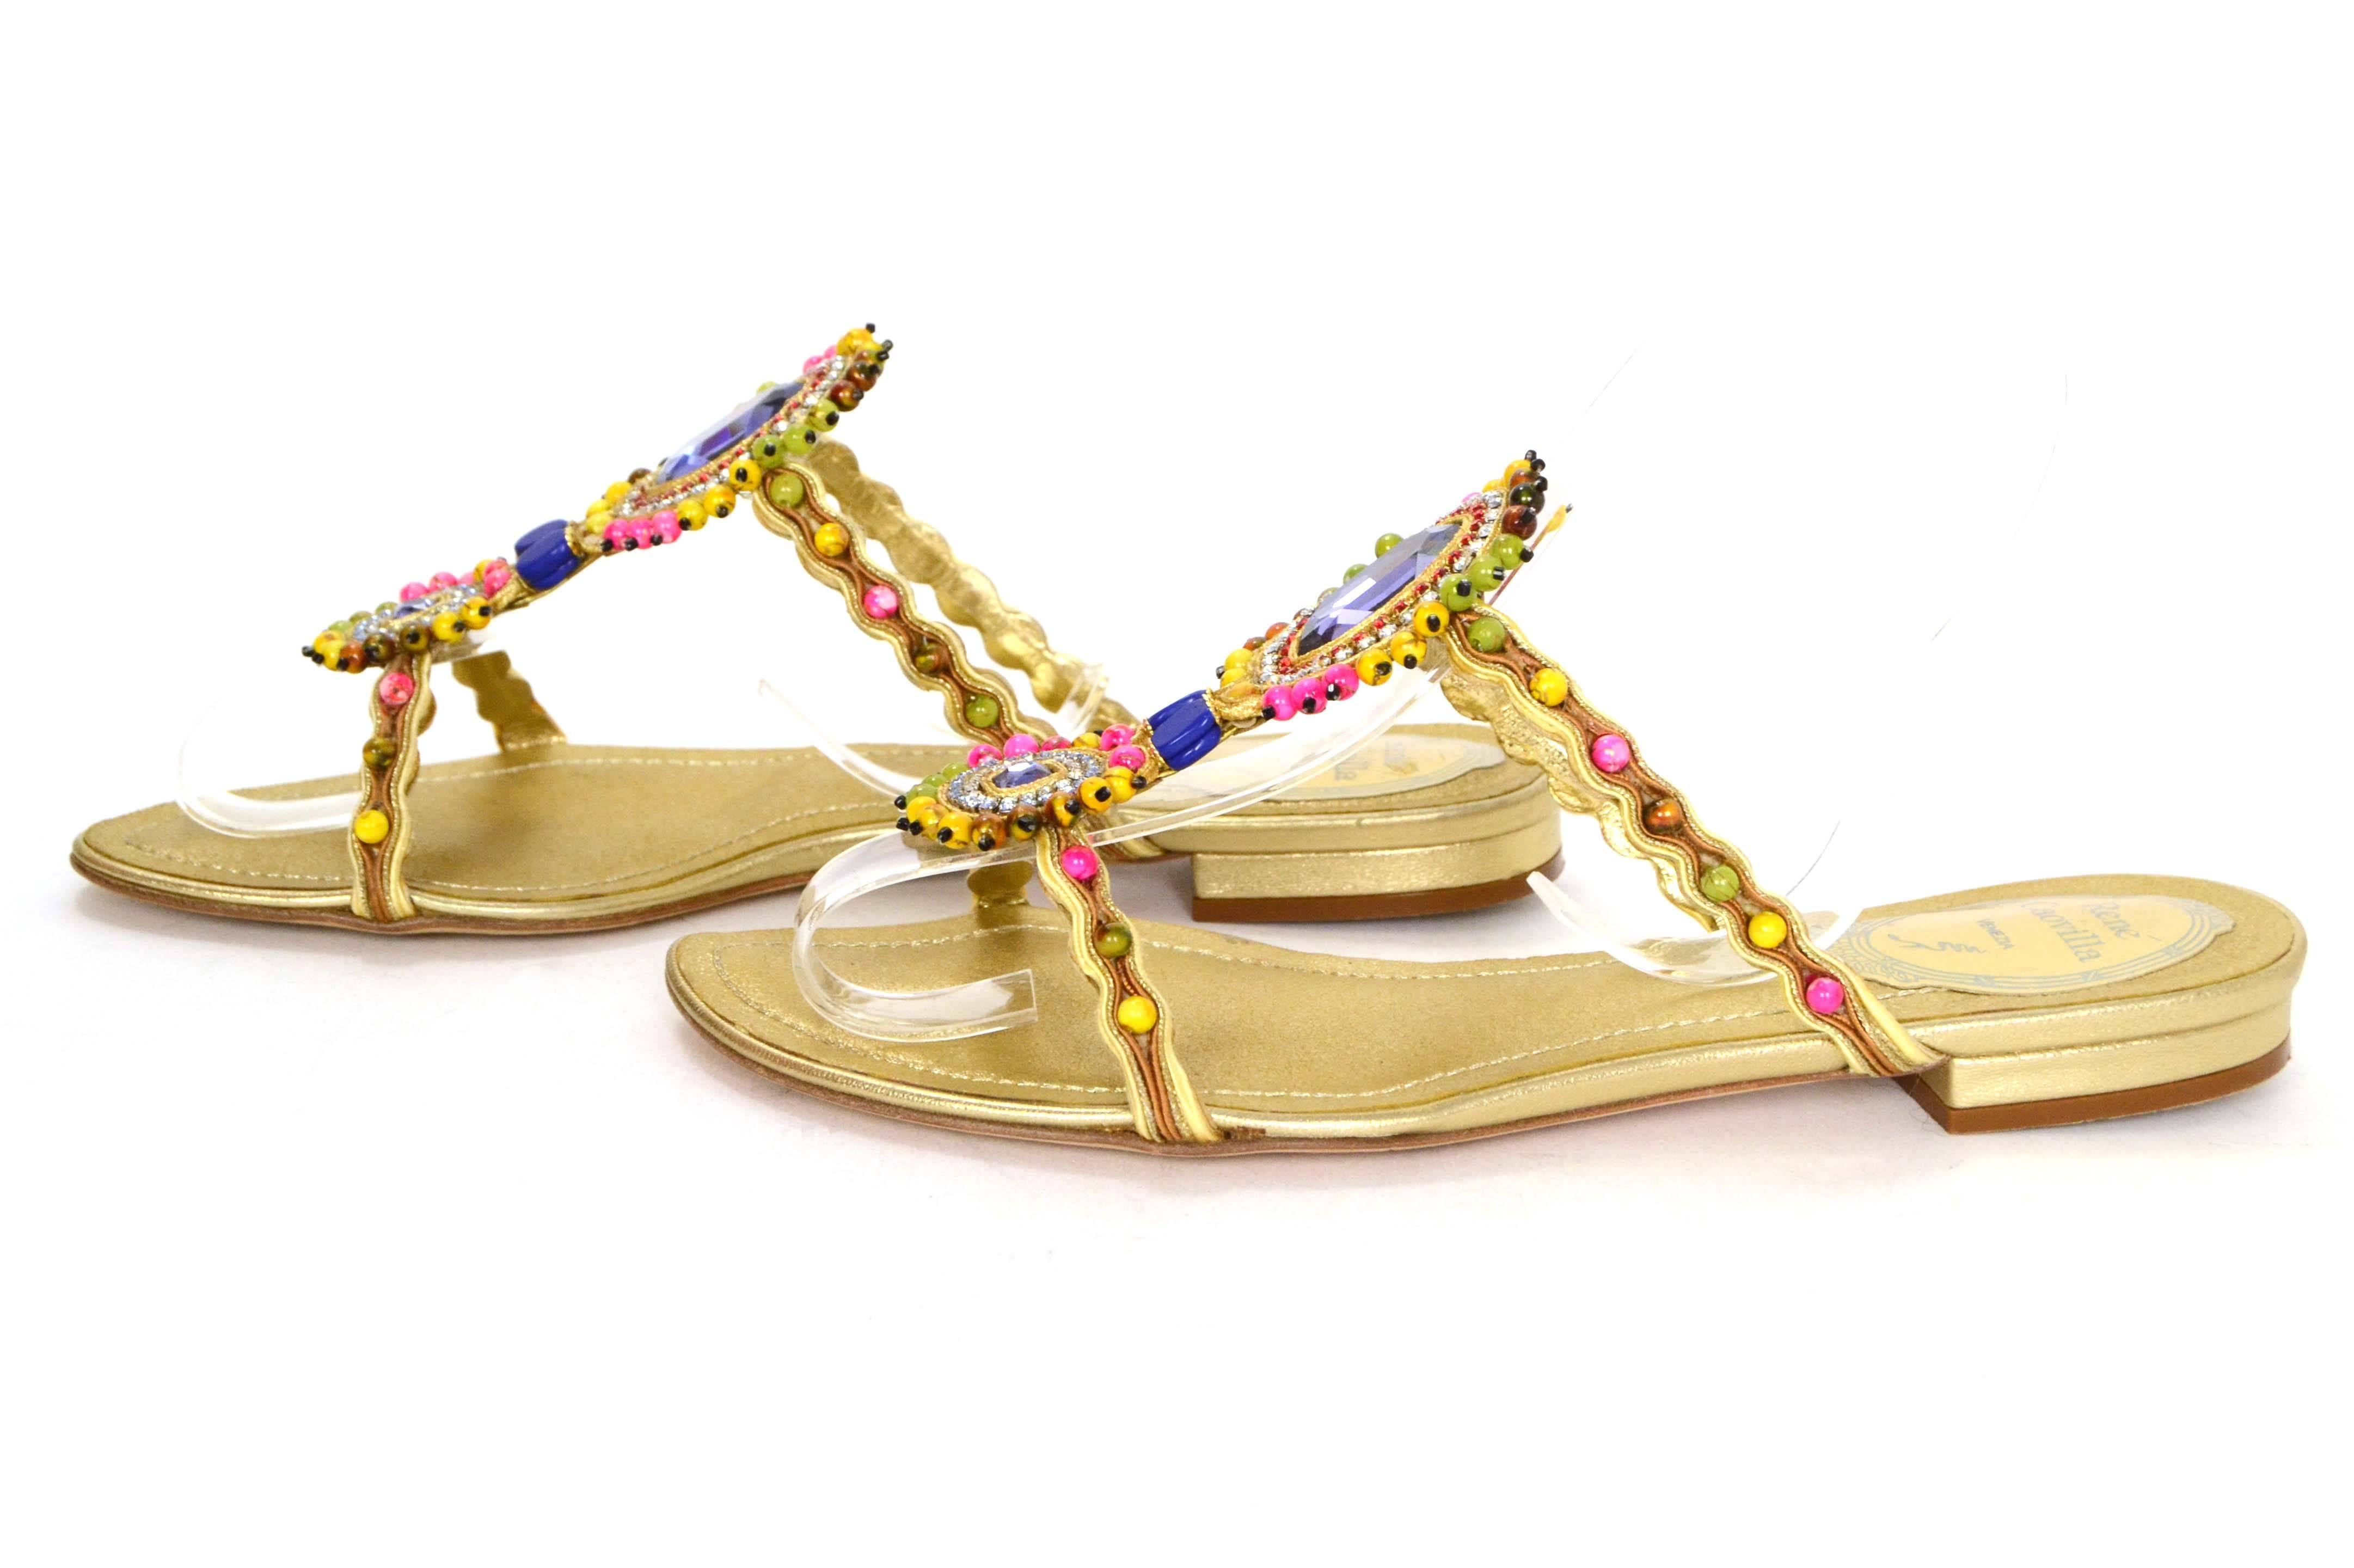 Rene Caovilla Gold Leather & Rhinestone Sandals 
Features brightly colored beads and rhinestones throughout

Made In: Italy
Color: Gold, pink, yellow, red, blue, green and brown
Materials: Leather, rhinestones and beads
Closure/Opening: